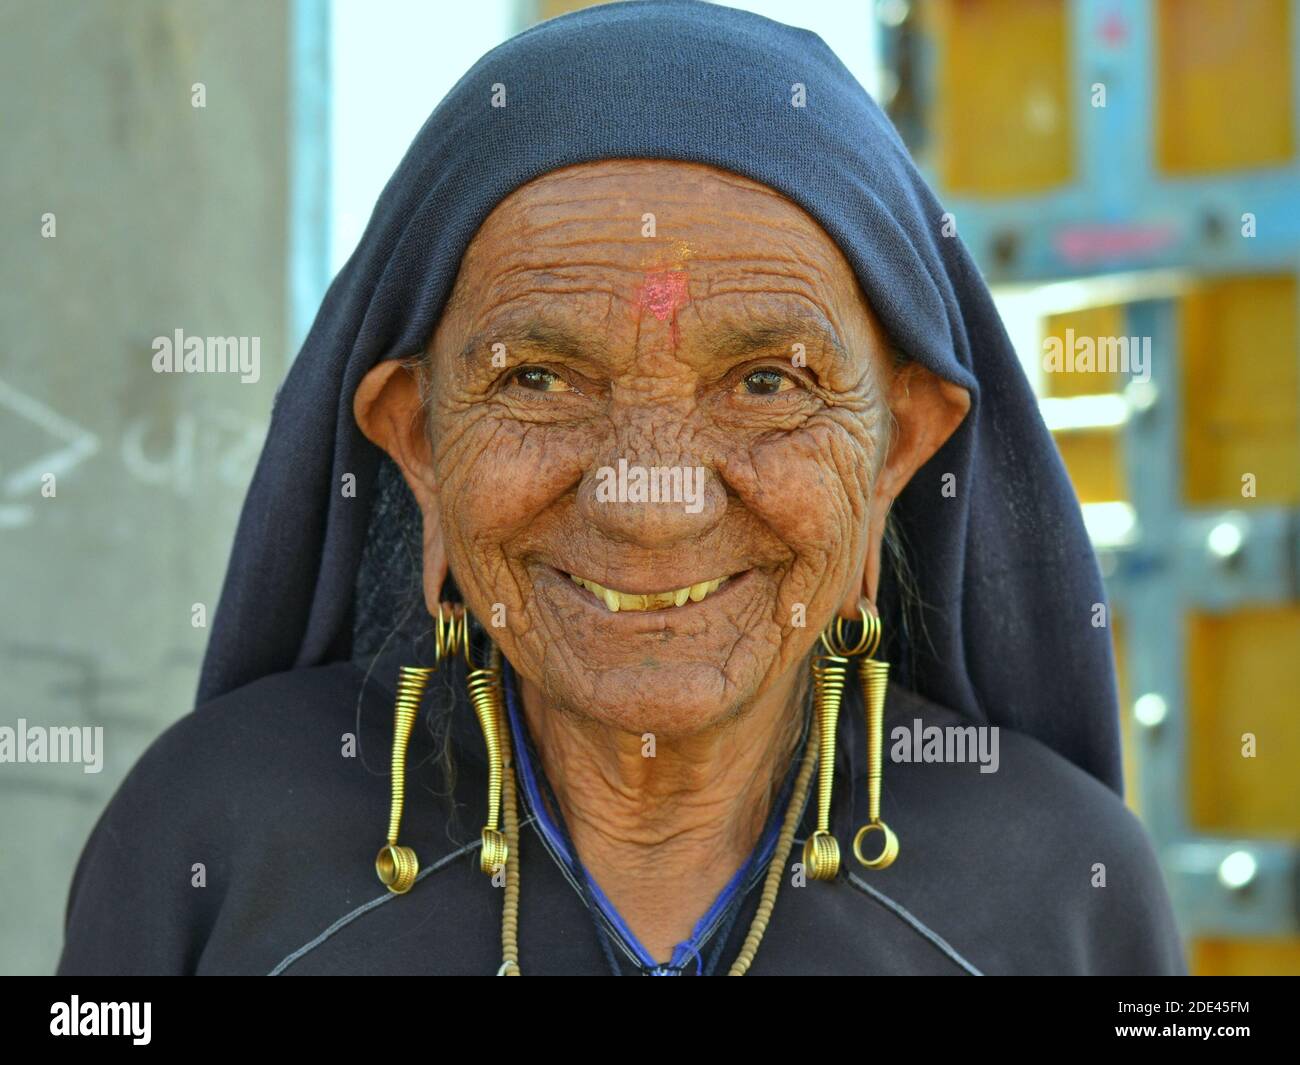 Old Indian Gujarati Rabari woman with face wrinkles and tribal snake earrings (nagali) in her elongated ear lobes smiles at the camera. Stock Photo